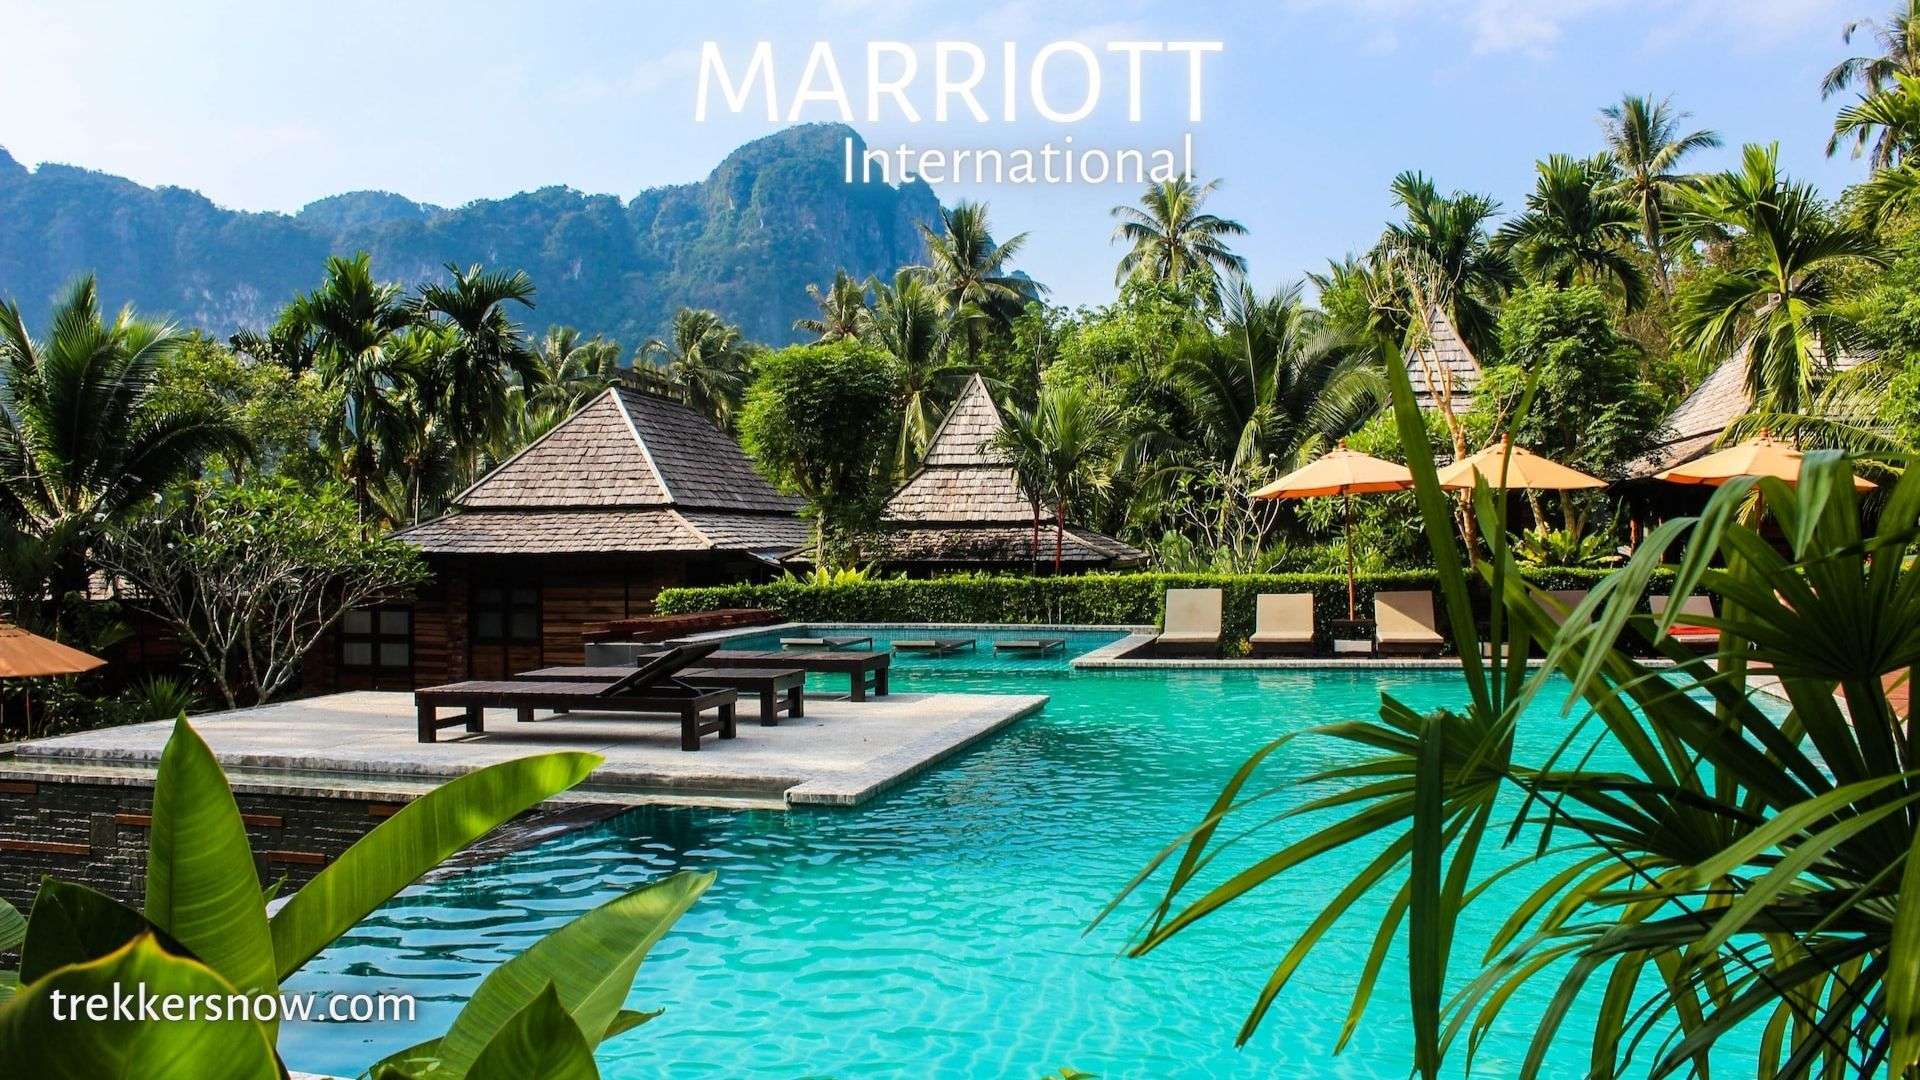 Marriott International: The 2nd Largest Hotel Chain in the World               